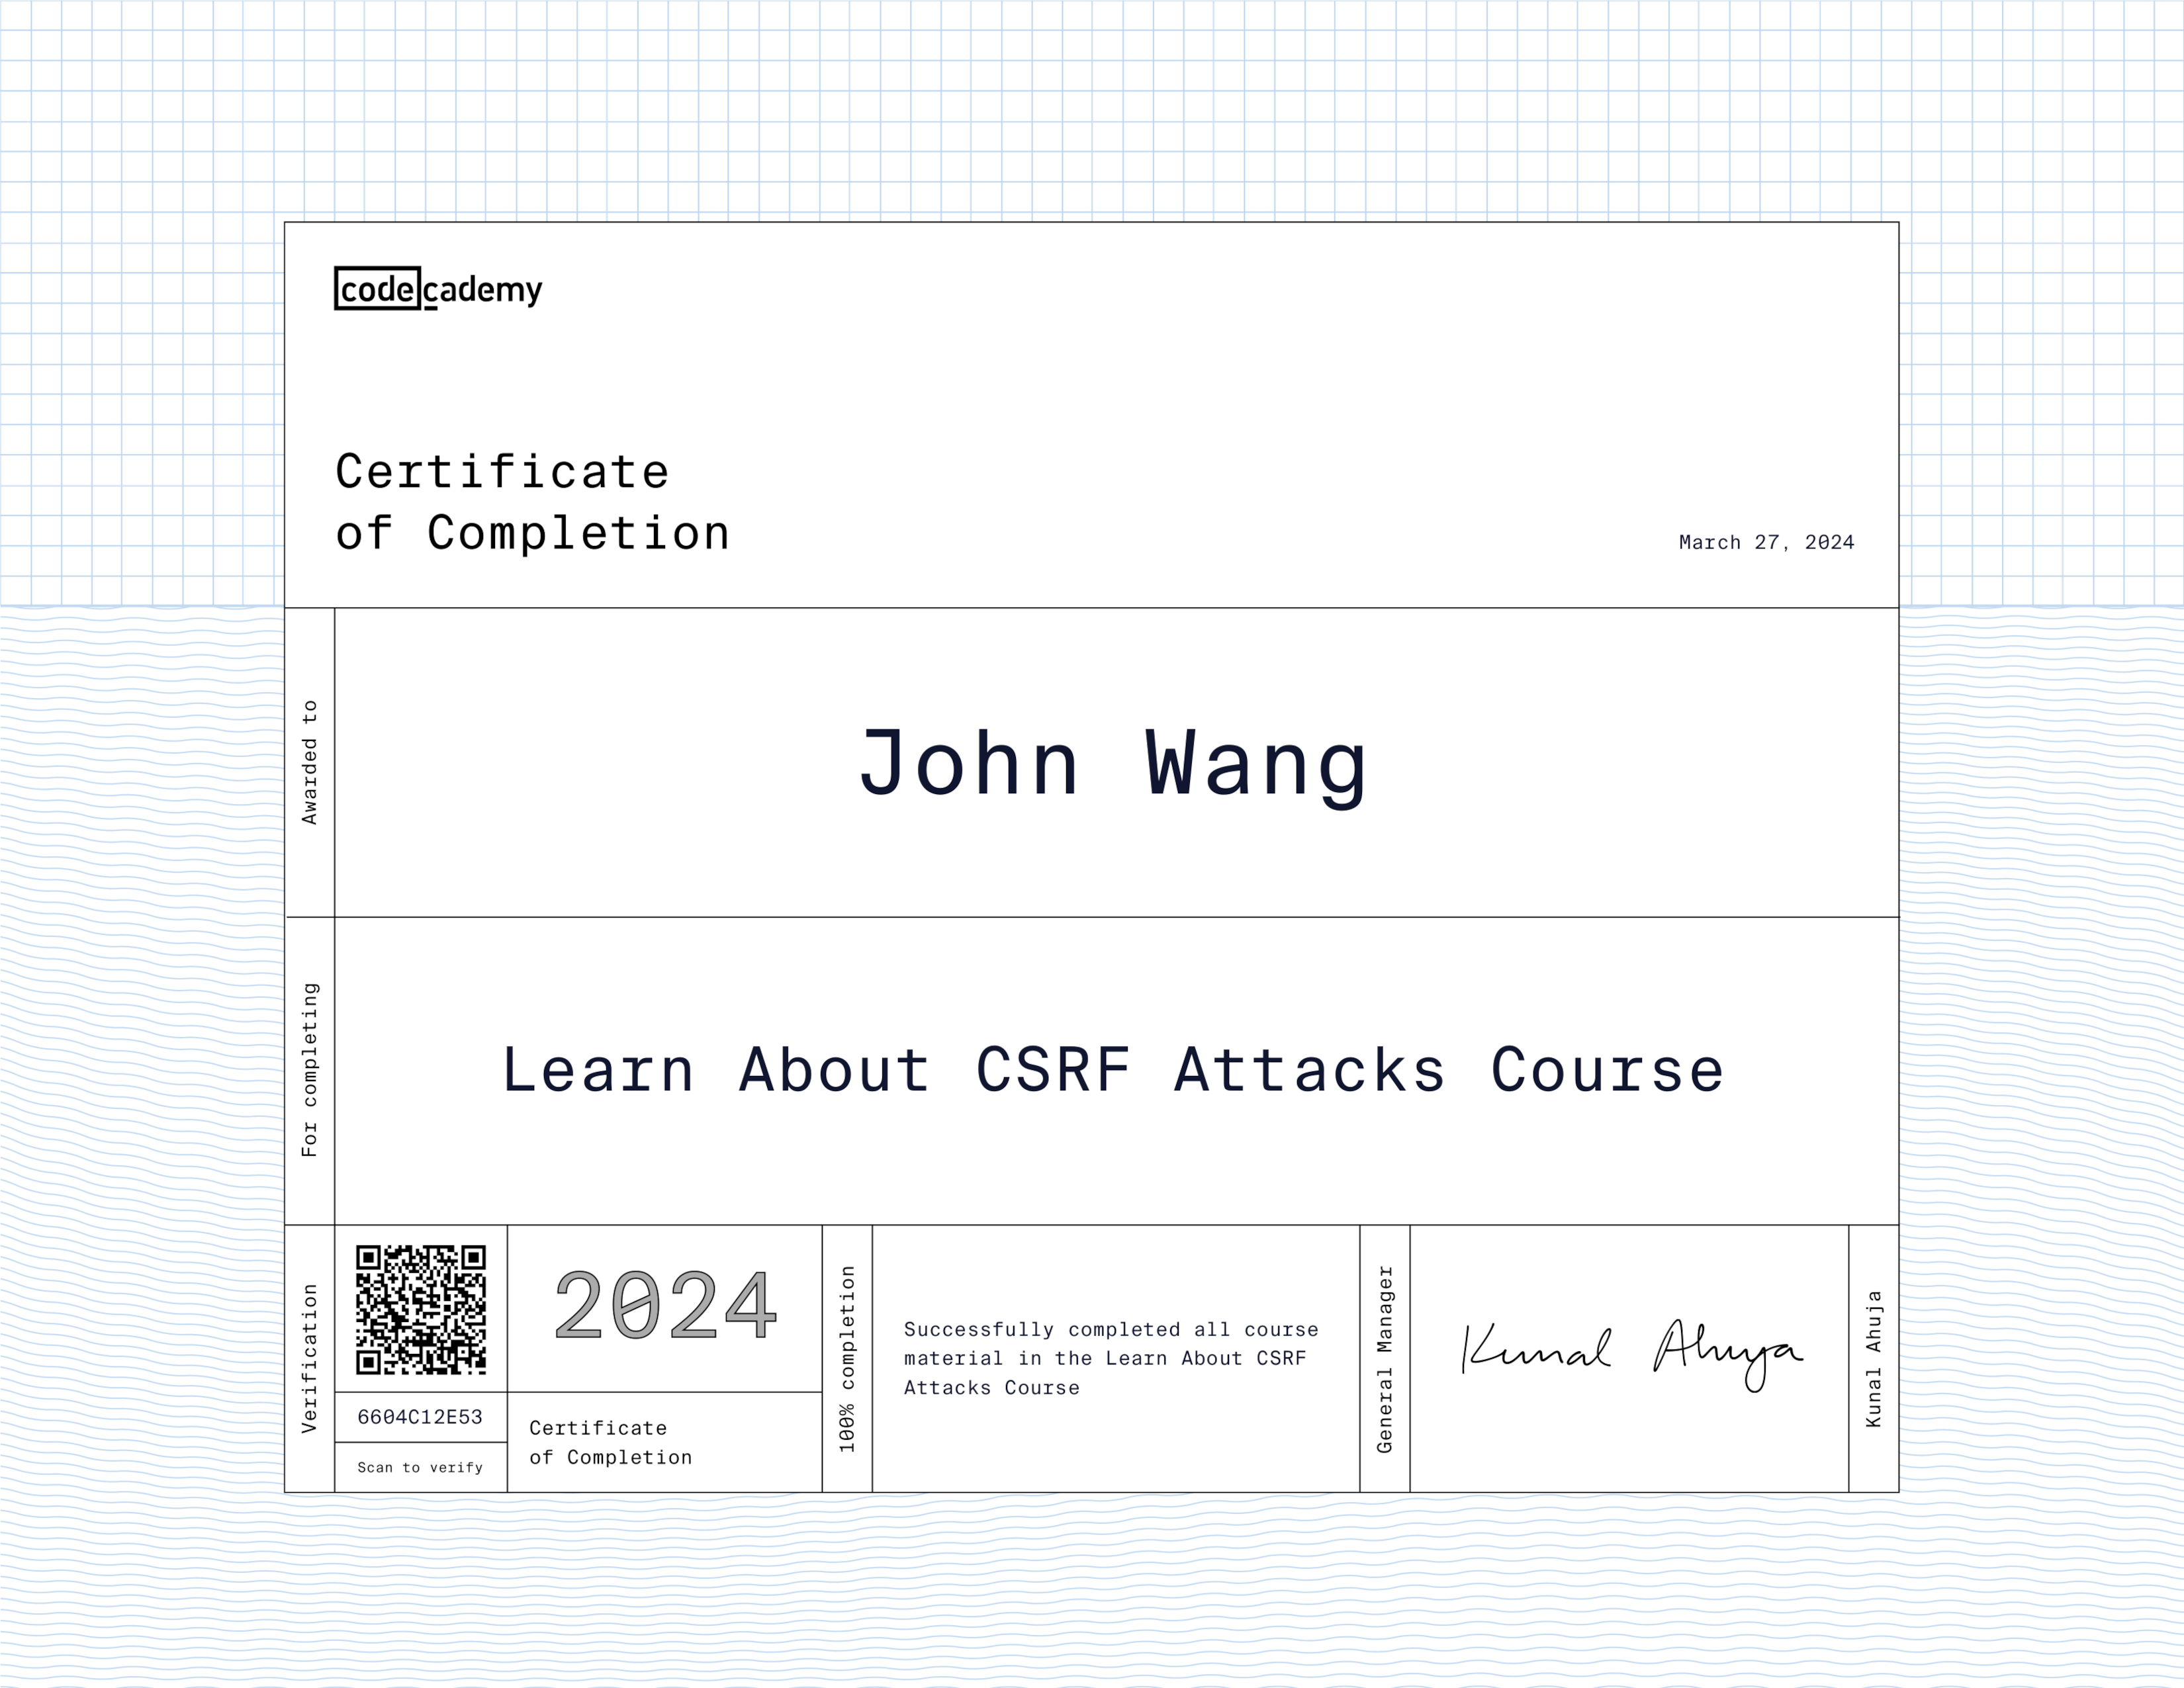 John's Learn about CSRF Attacks from Codecademy